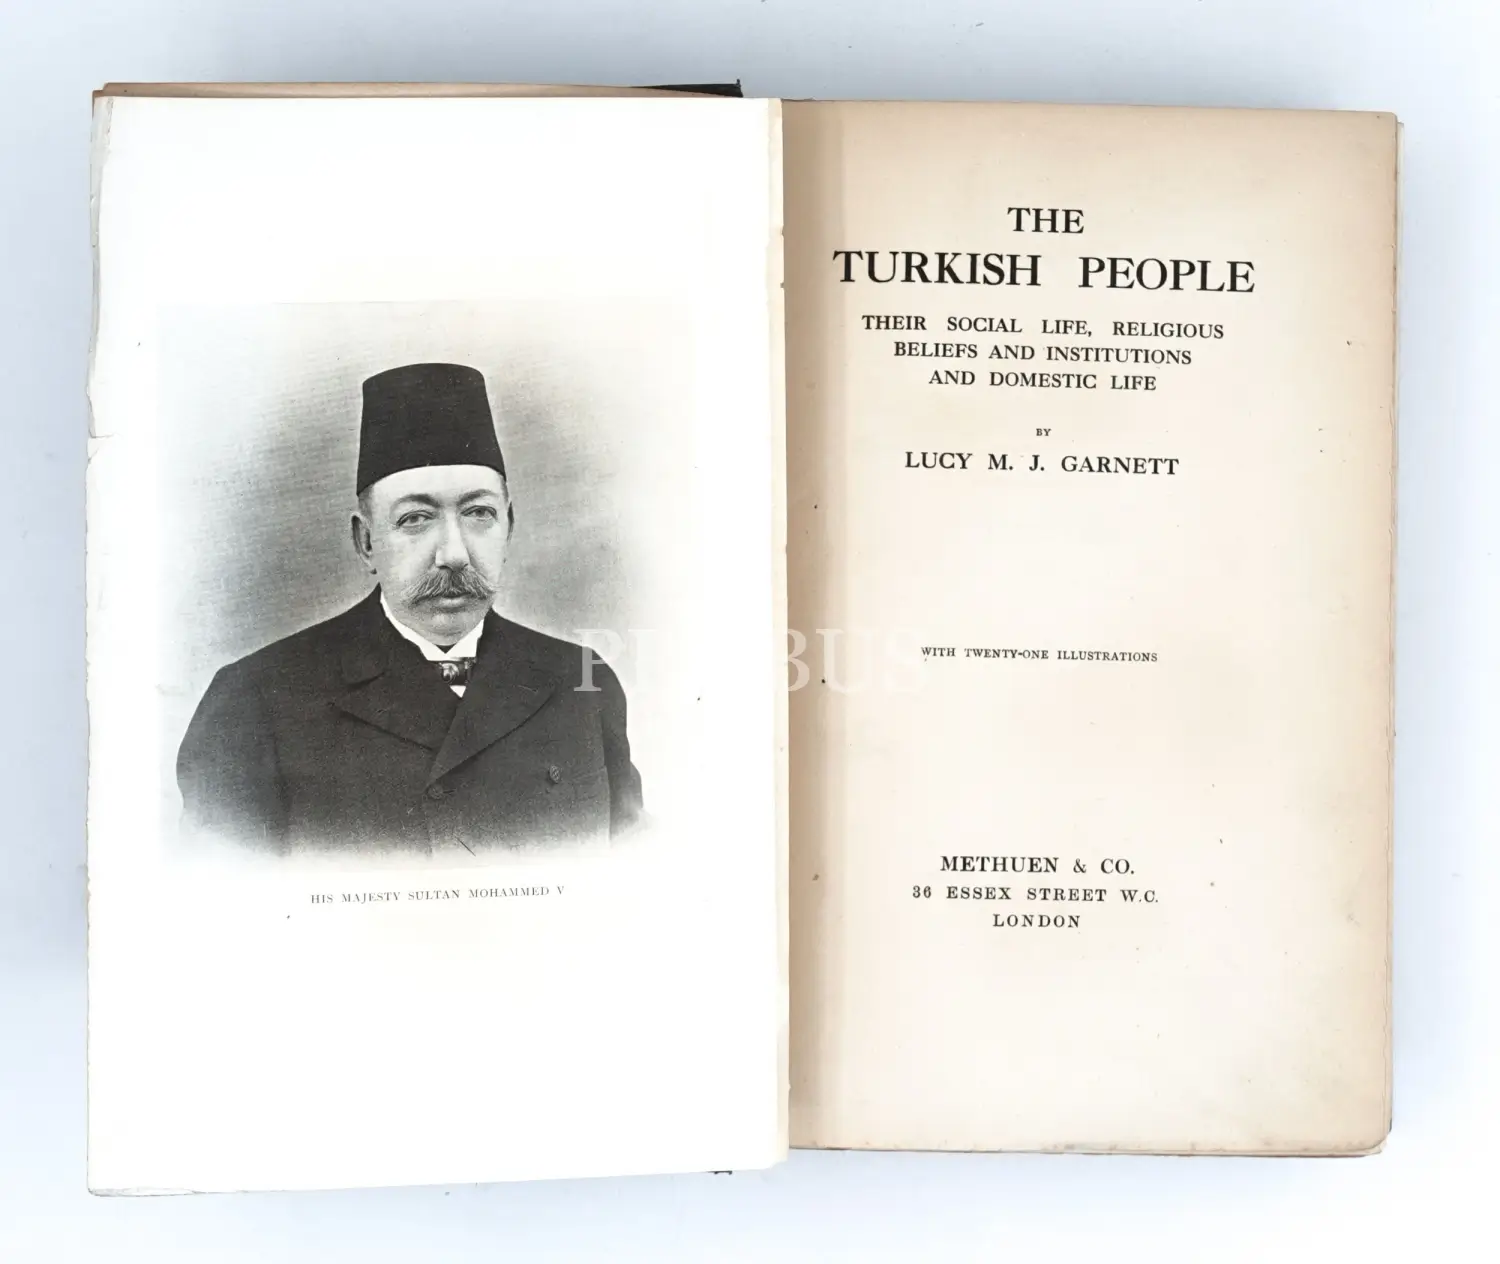 THE TURKISH PEOPLE (Their Social Life, Religious Beliefs and Instıtutıons and Domestic Life), Lucy M. J. Garnett, 1909, Methuen & Co., London, 296+40 sayfa, 15x23 cm...